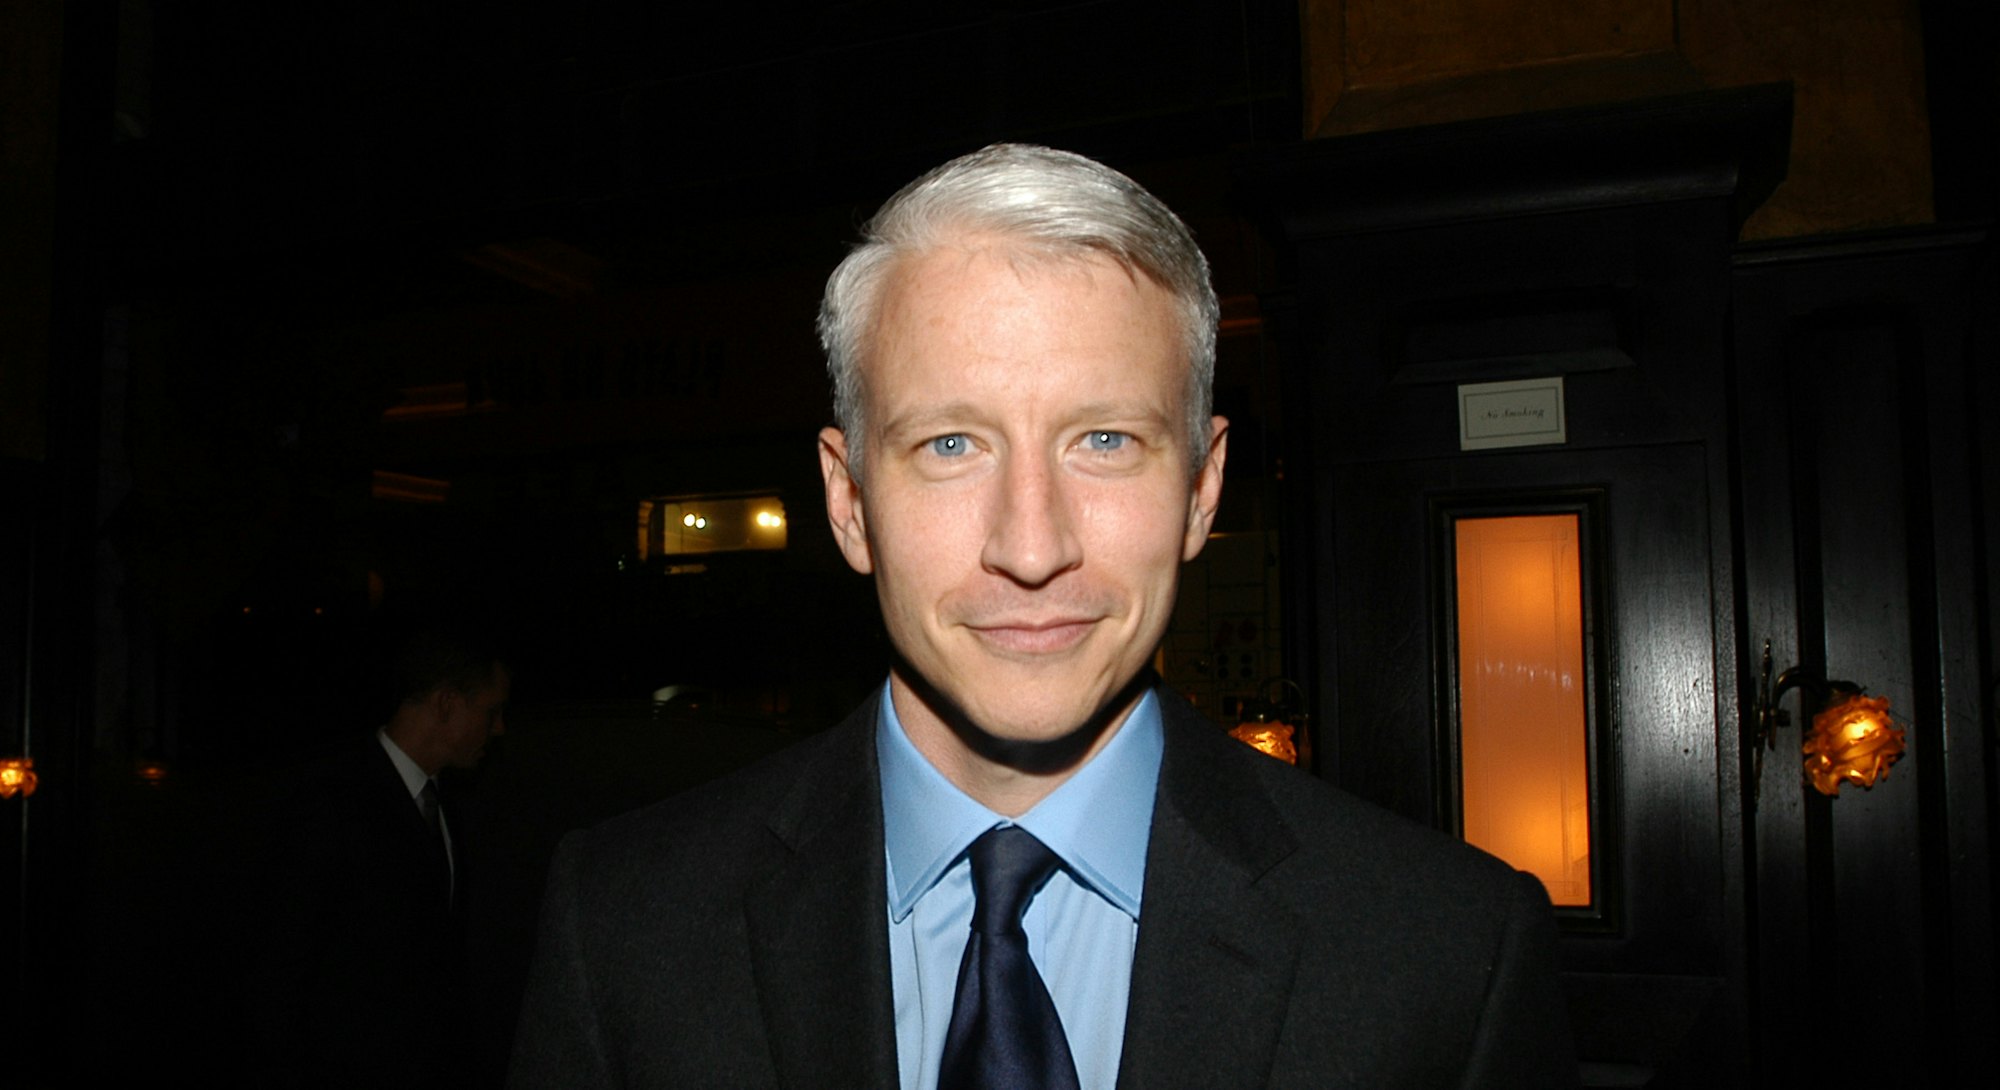 NEW YORK CITY, NY - OCTOBER 19: Anderson Cooper attends Friends in Deed Fall Benefit Honoring Elie a...